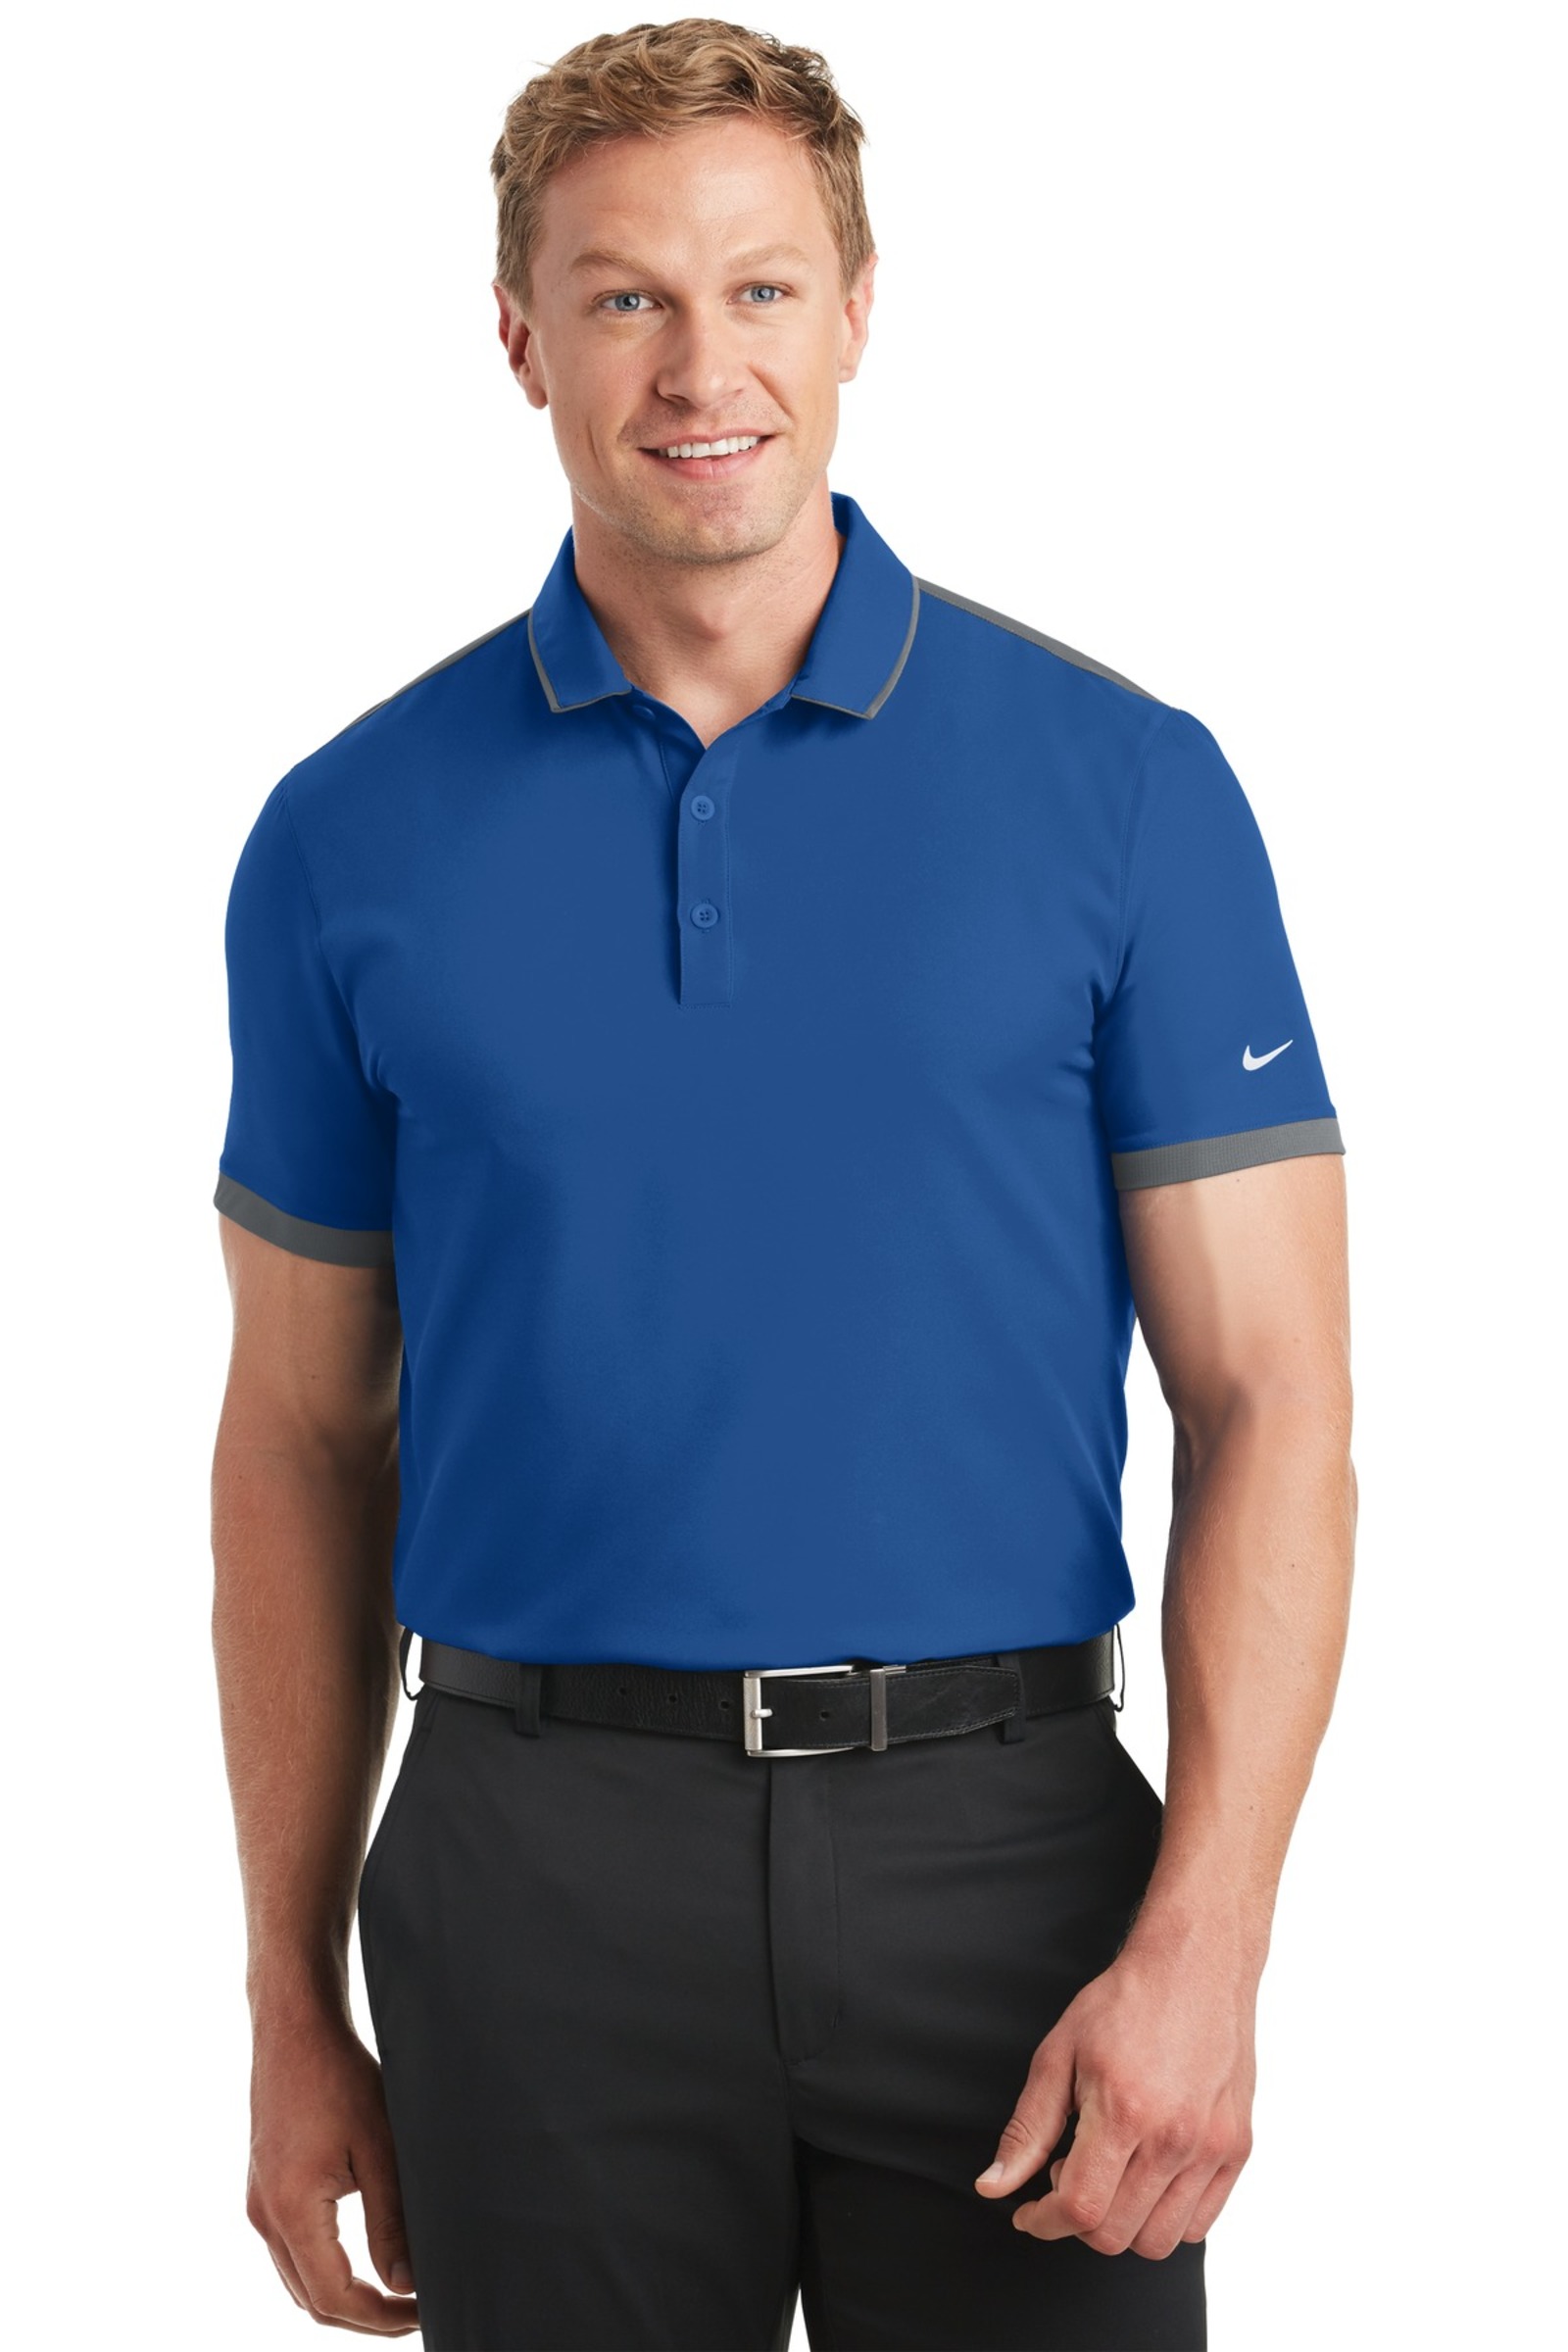 Nike Golf Embroidered Men's Dri-FIT Stretch Woven Polo